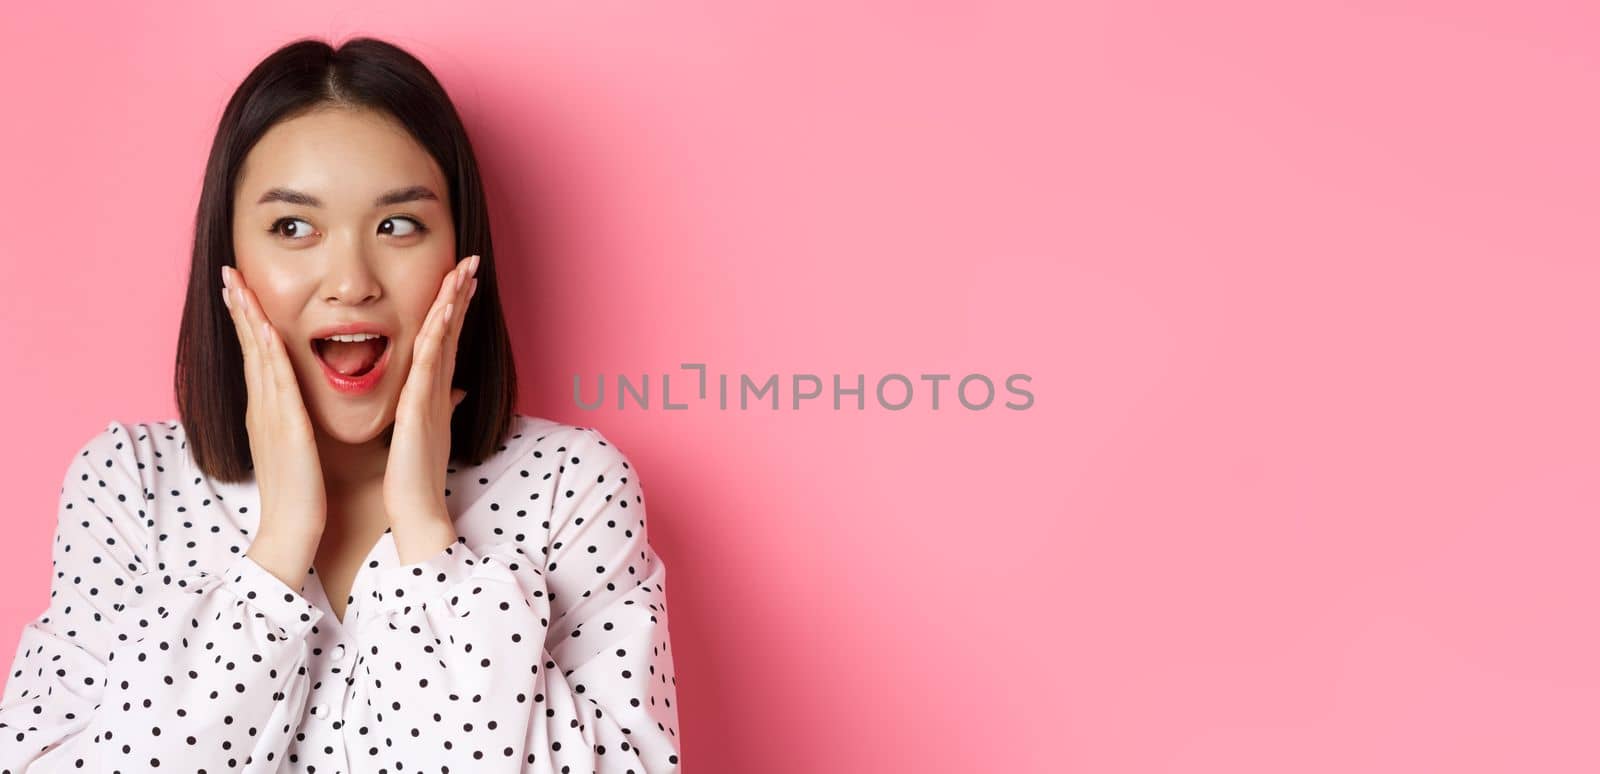 Close-up of beautiful asian woman looking surprised and excited, hear amazing news, looking left and rejoicing, standing against pink background.